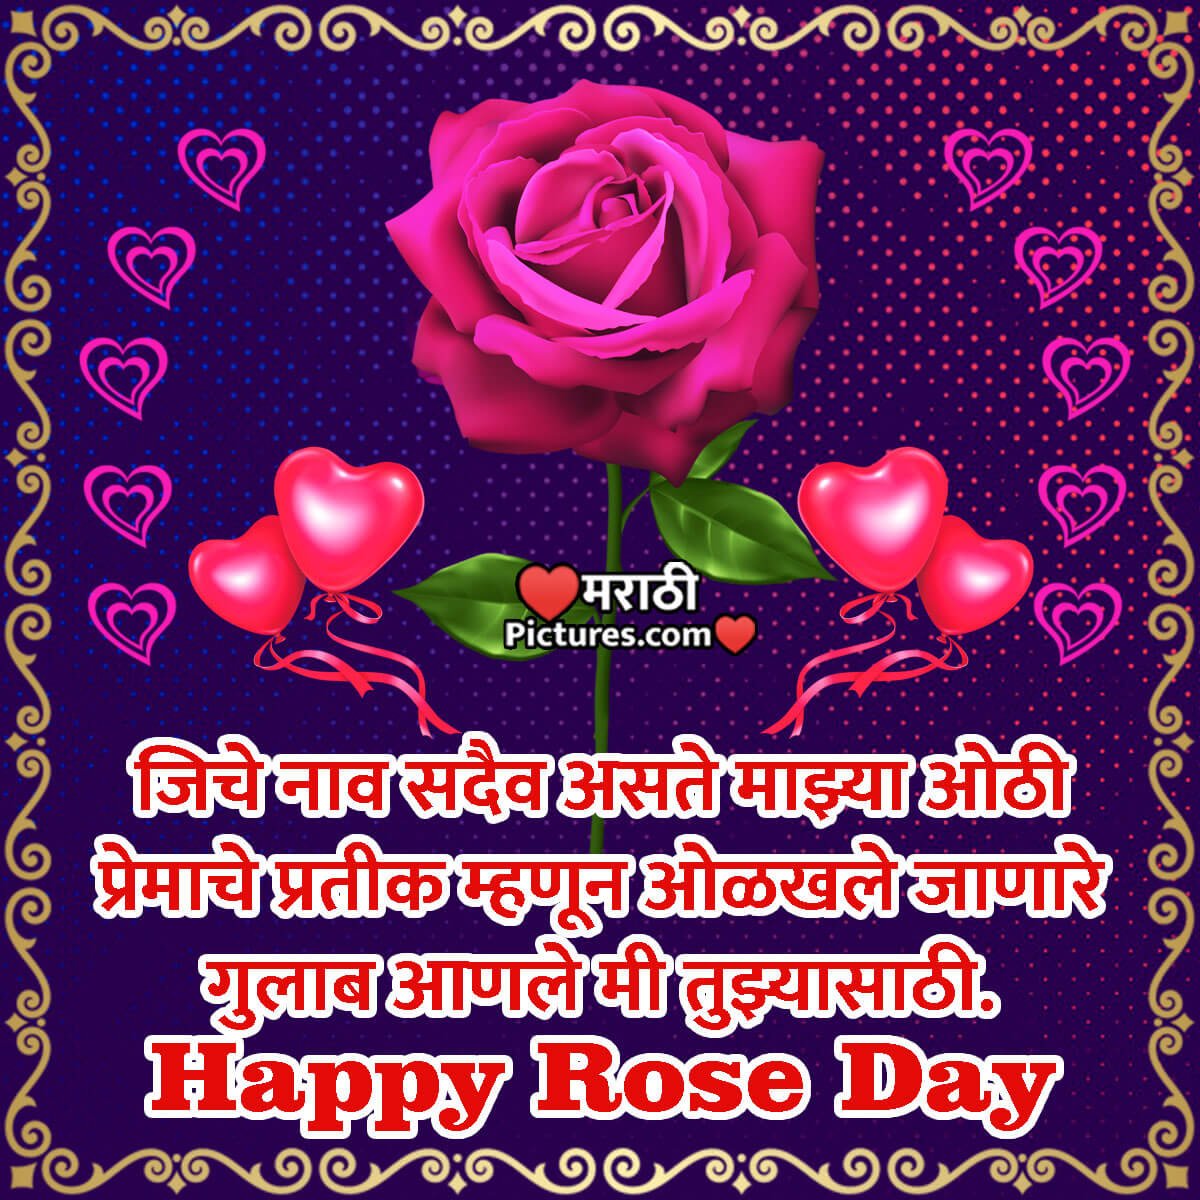 Happy Rose Day Love Message In Marathi - MarathiPictures.com